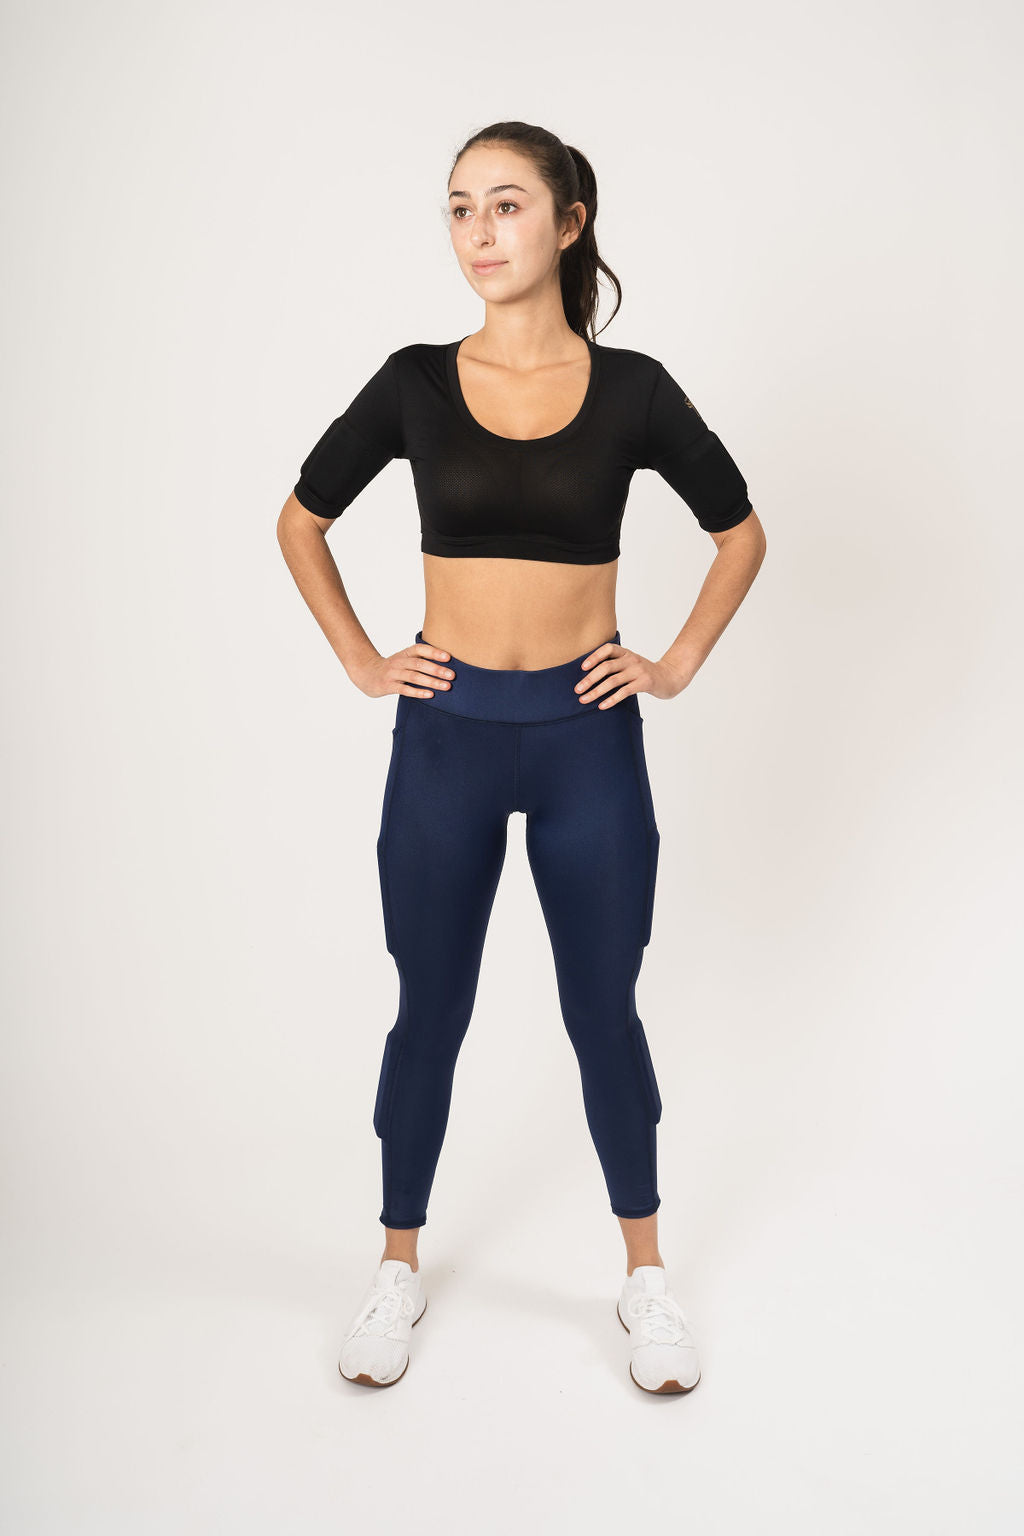 Woman standing with her hands on her hip wearing black weighted crop top and navy weighted leggings